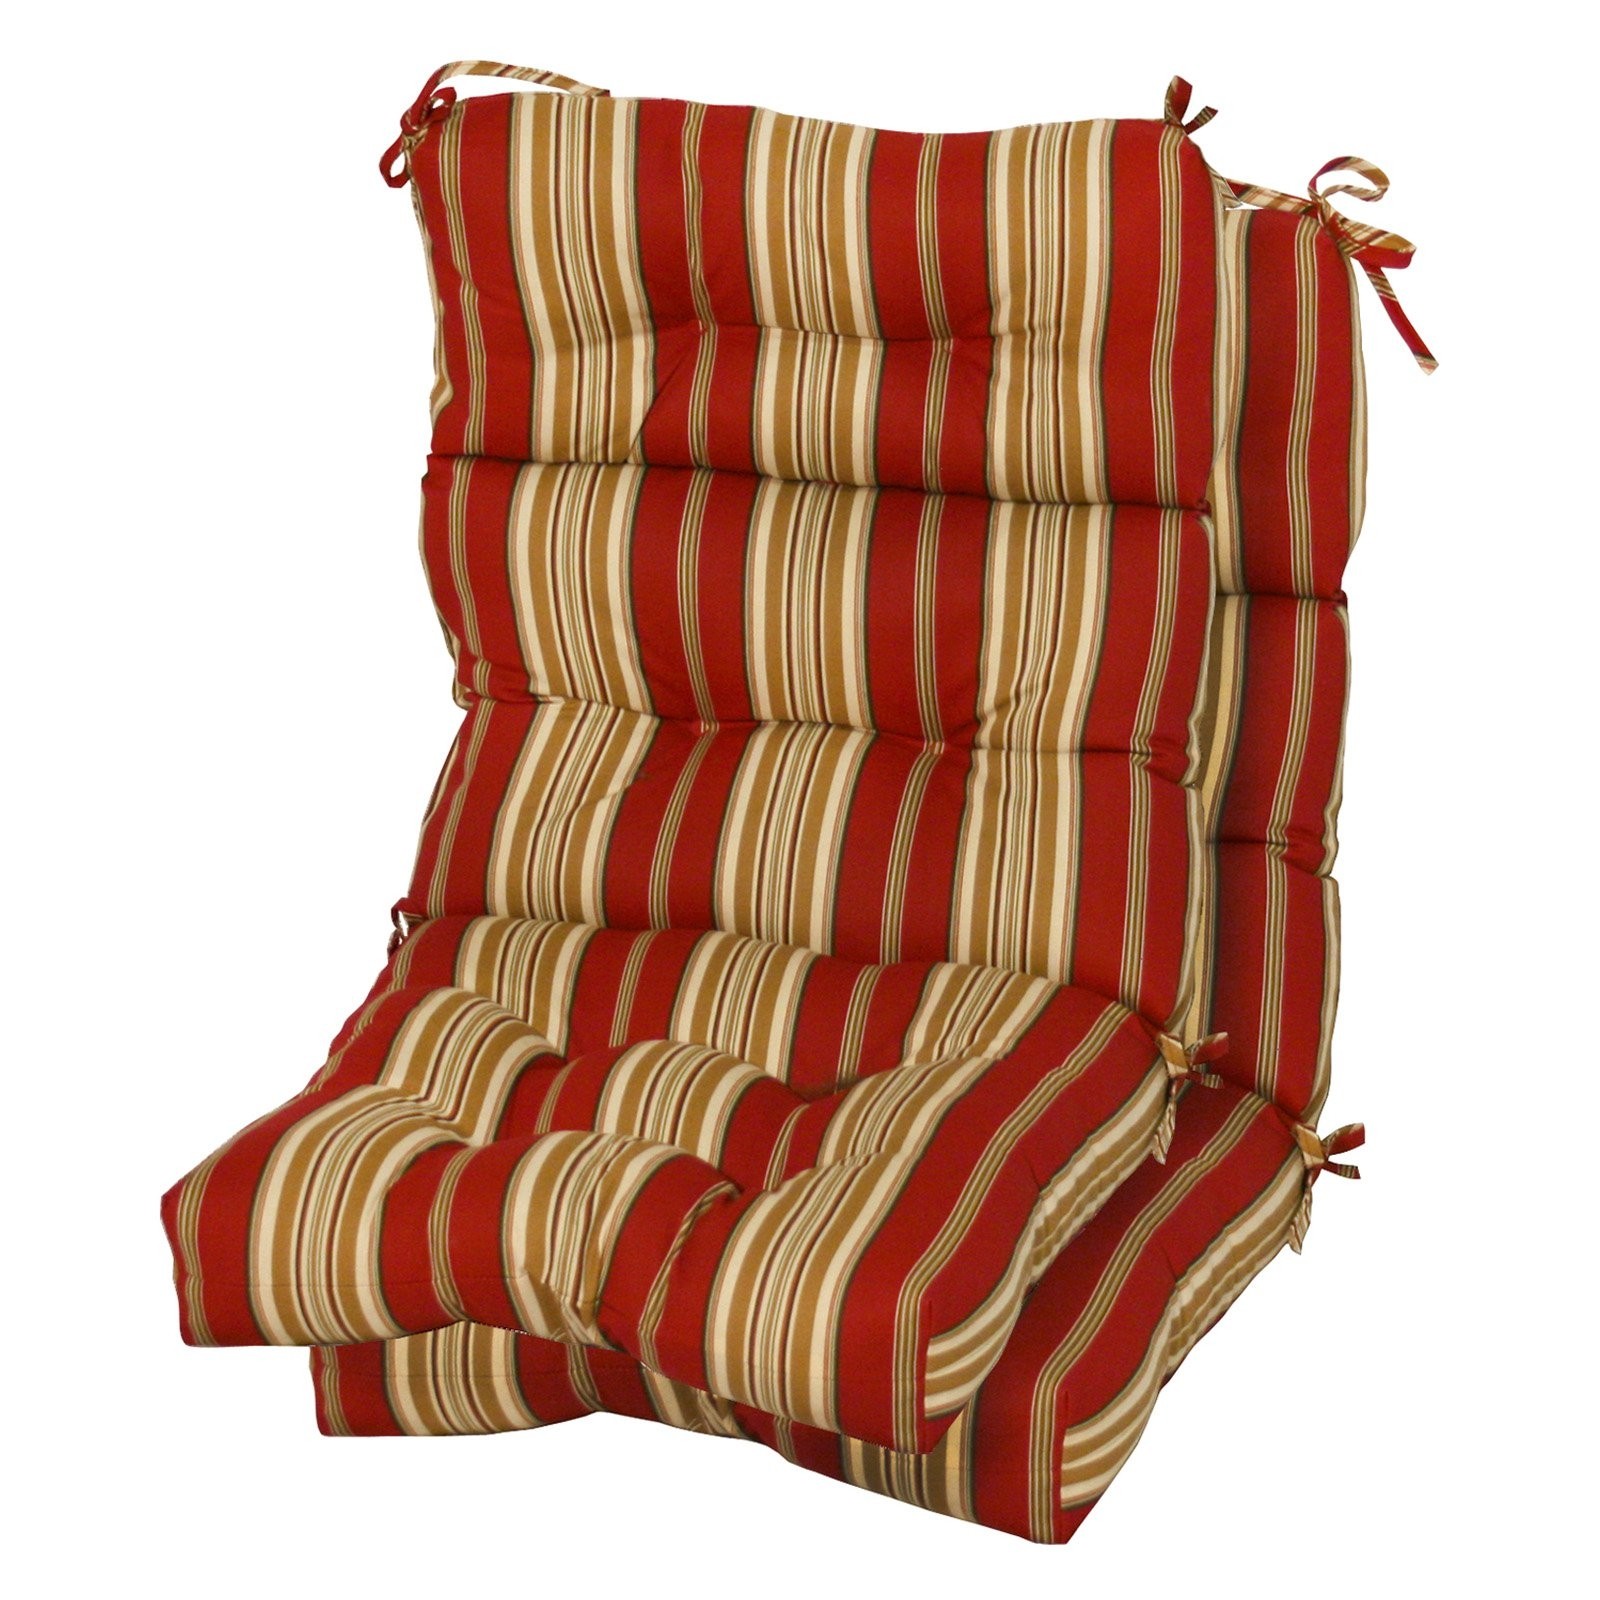 Greendale Home Fashions Indoor/Outdoor High Back Chair Cushions, Roma Stripe, Set of 2